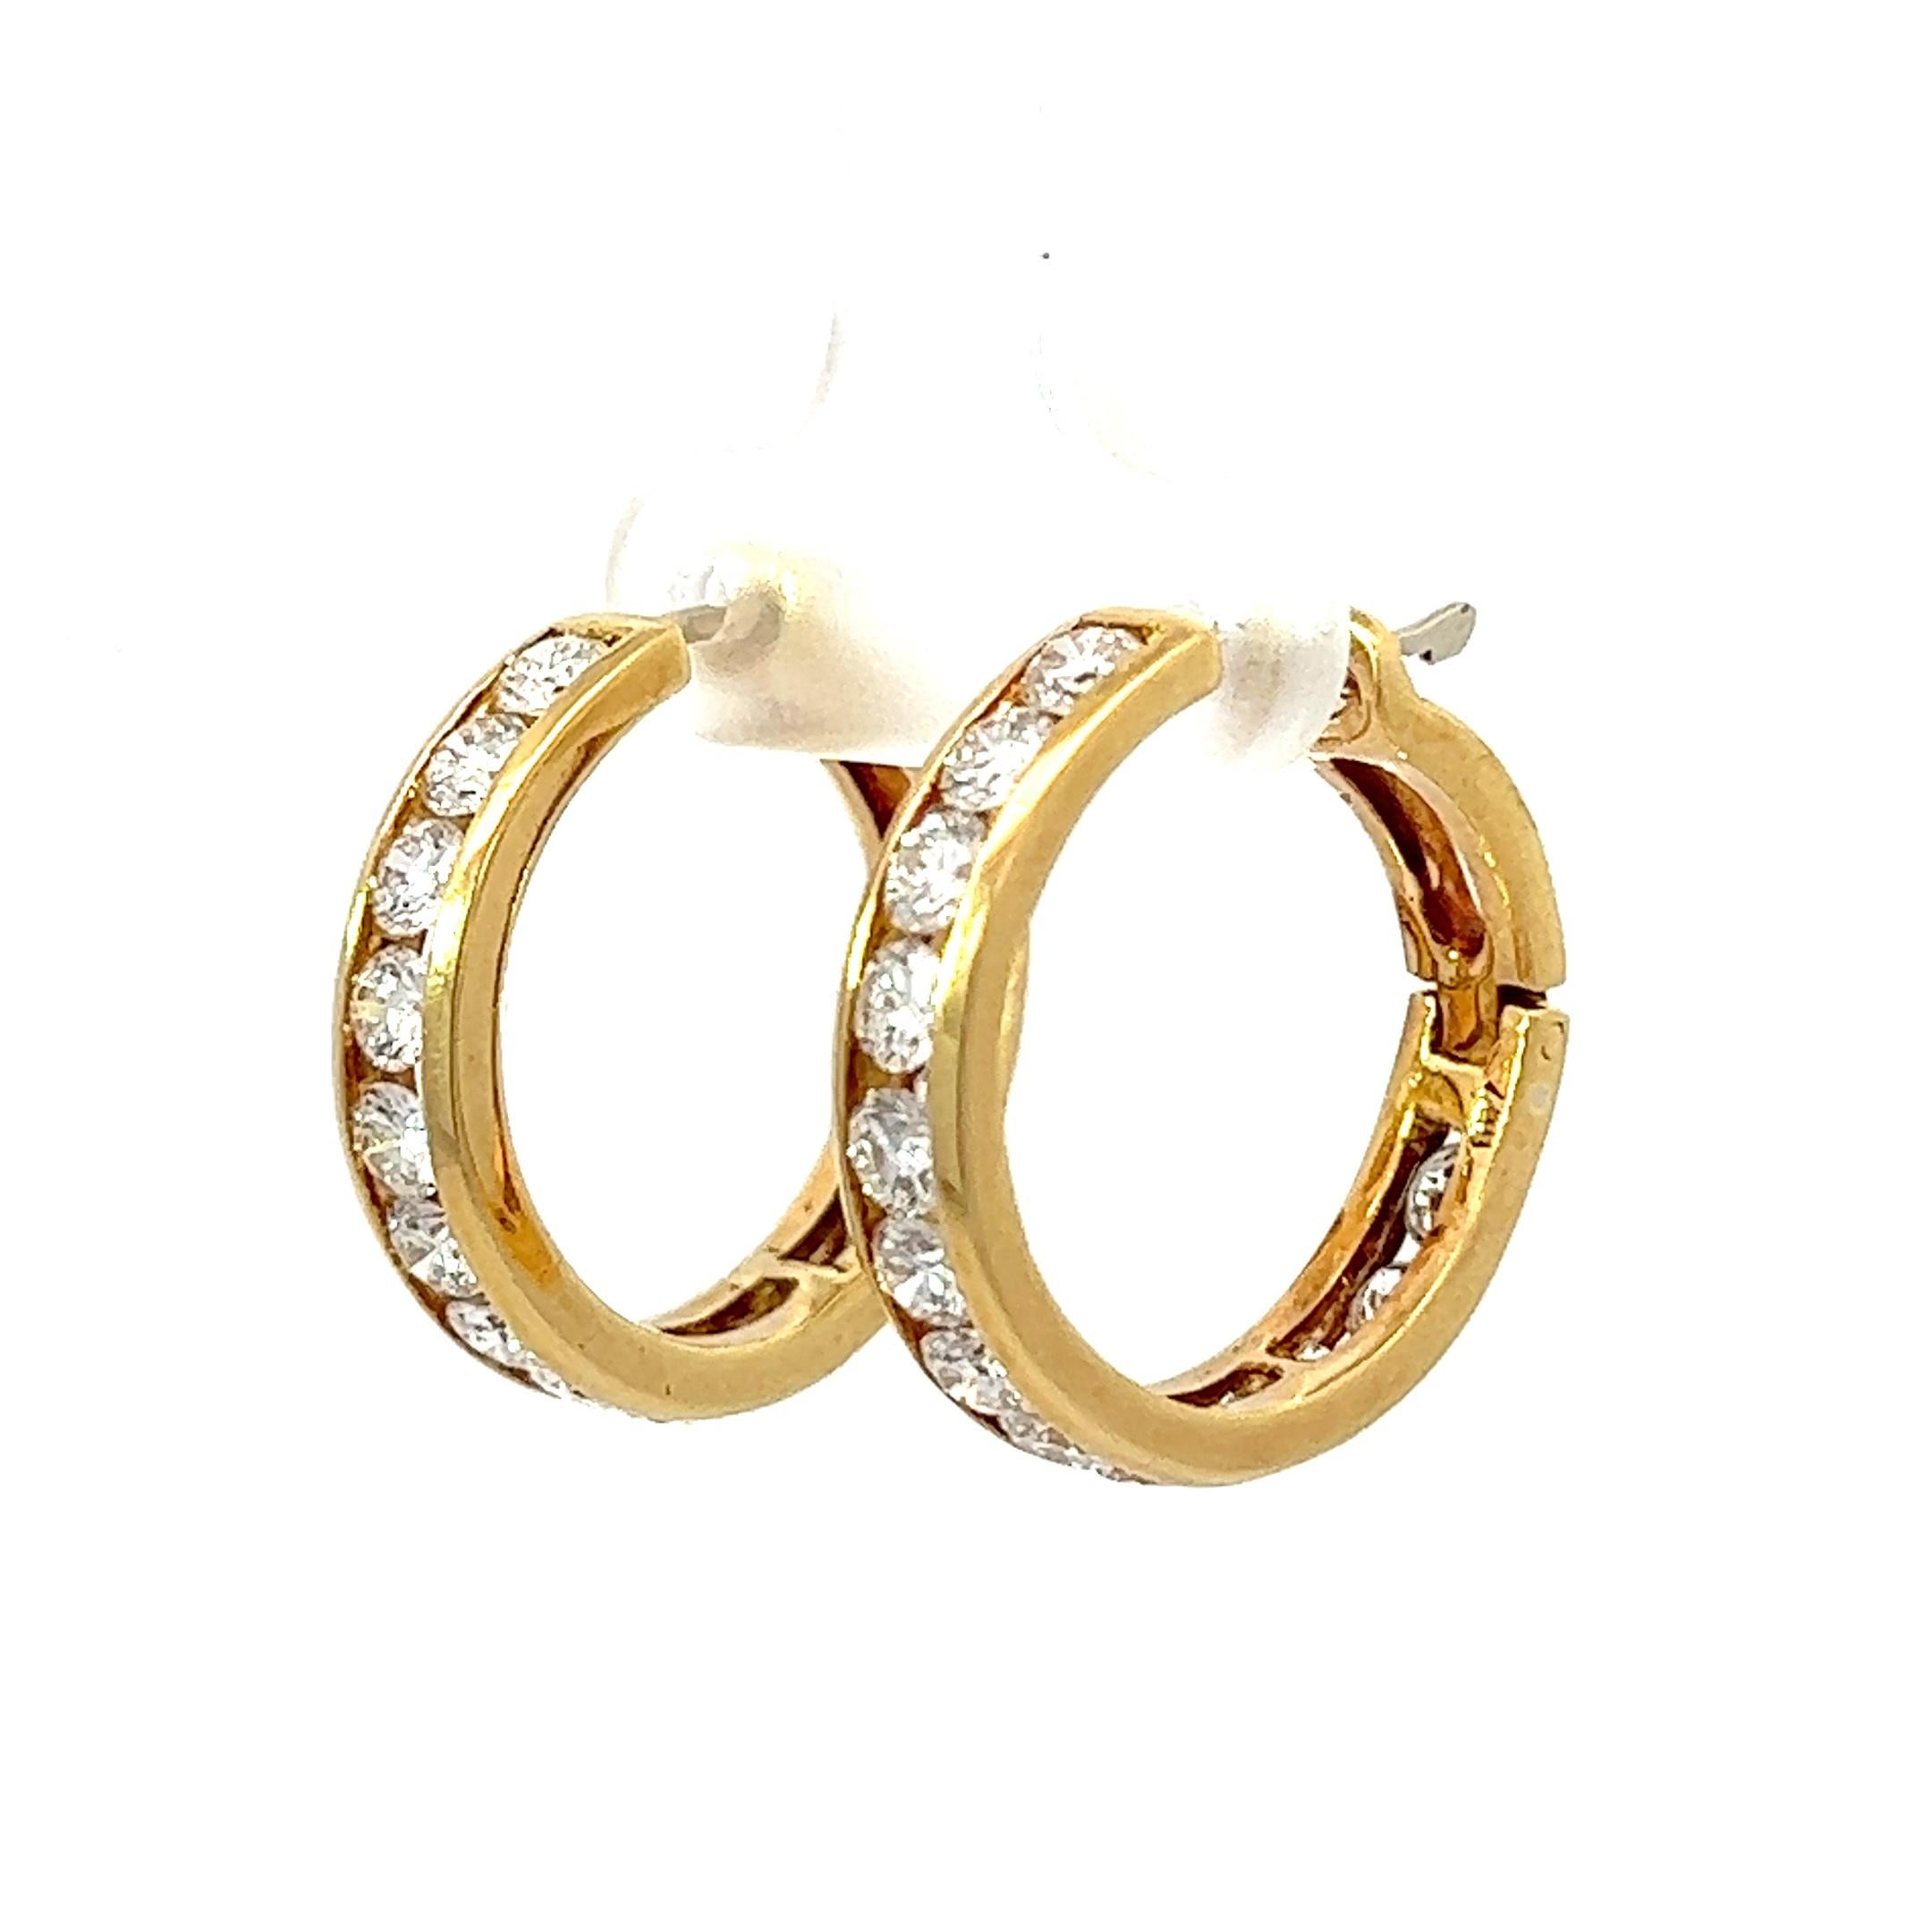 These mini hoops are crafted from 18KY gold and boast a dazzling display of round diamonds at their center. With their sleek yellow gold hue, they are the perfect accessory to elevate any outfit. Make a bold fashion statement without uttering a